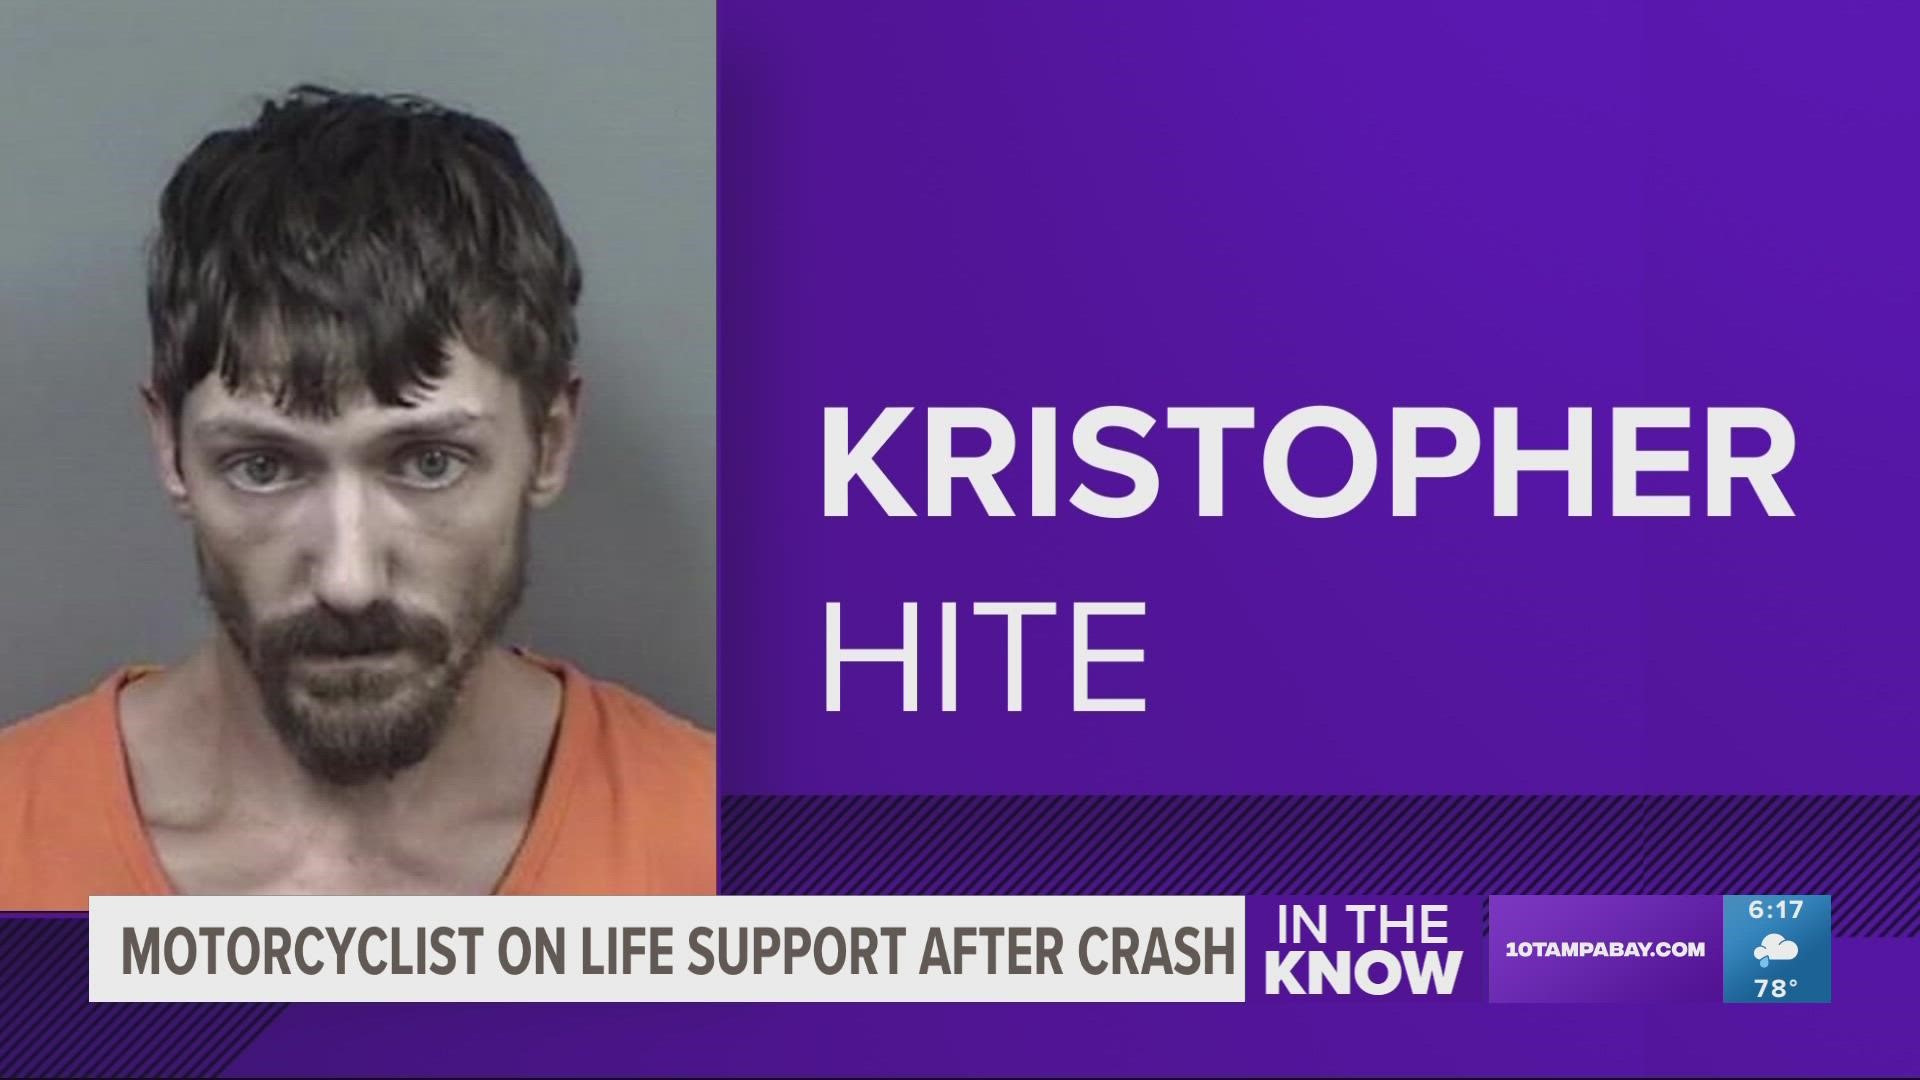 Kristopher Hite allegedly swerved into a motorcyclist, causing a violent crash, according to the sheriff's office.